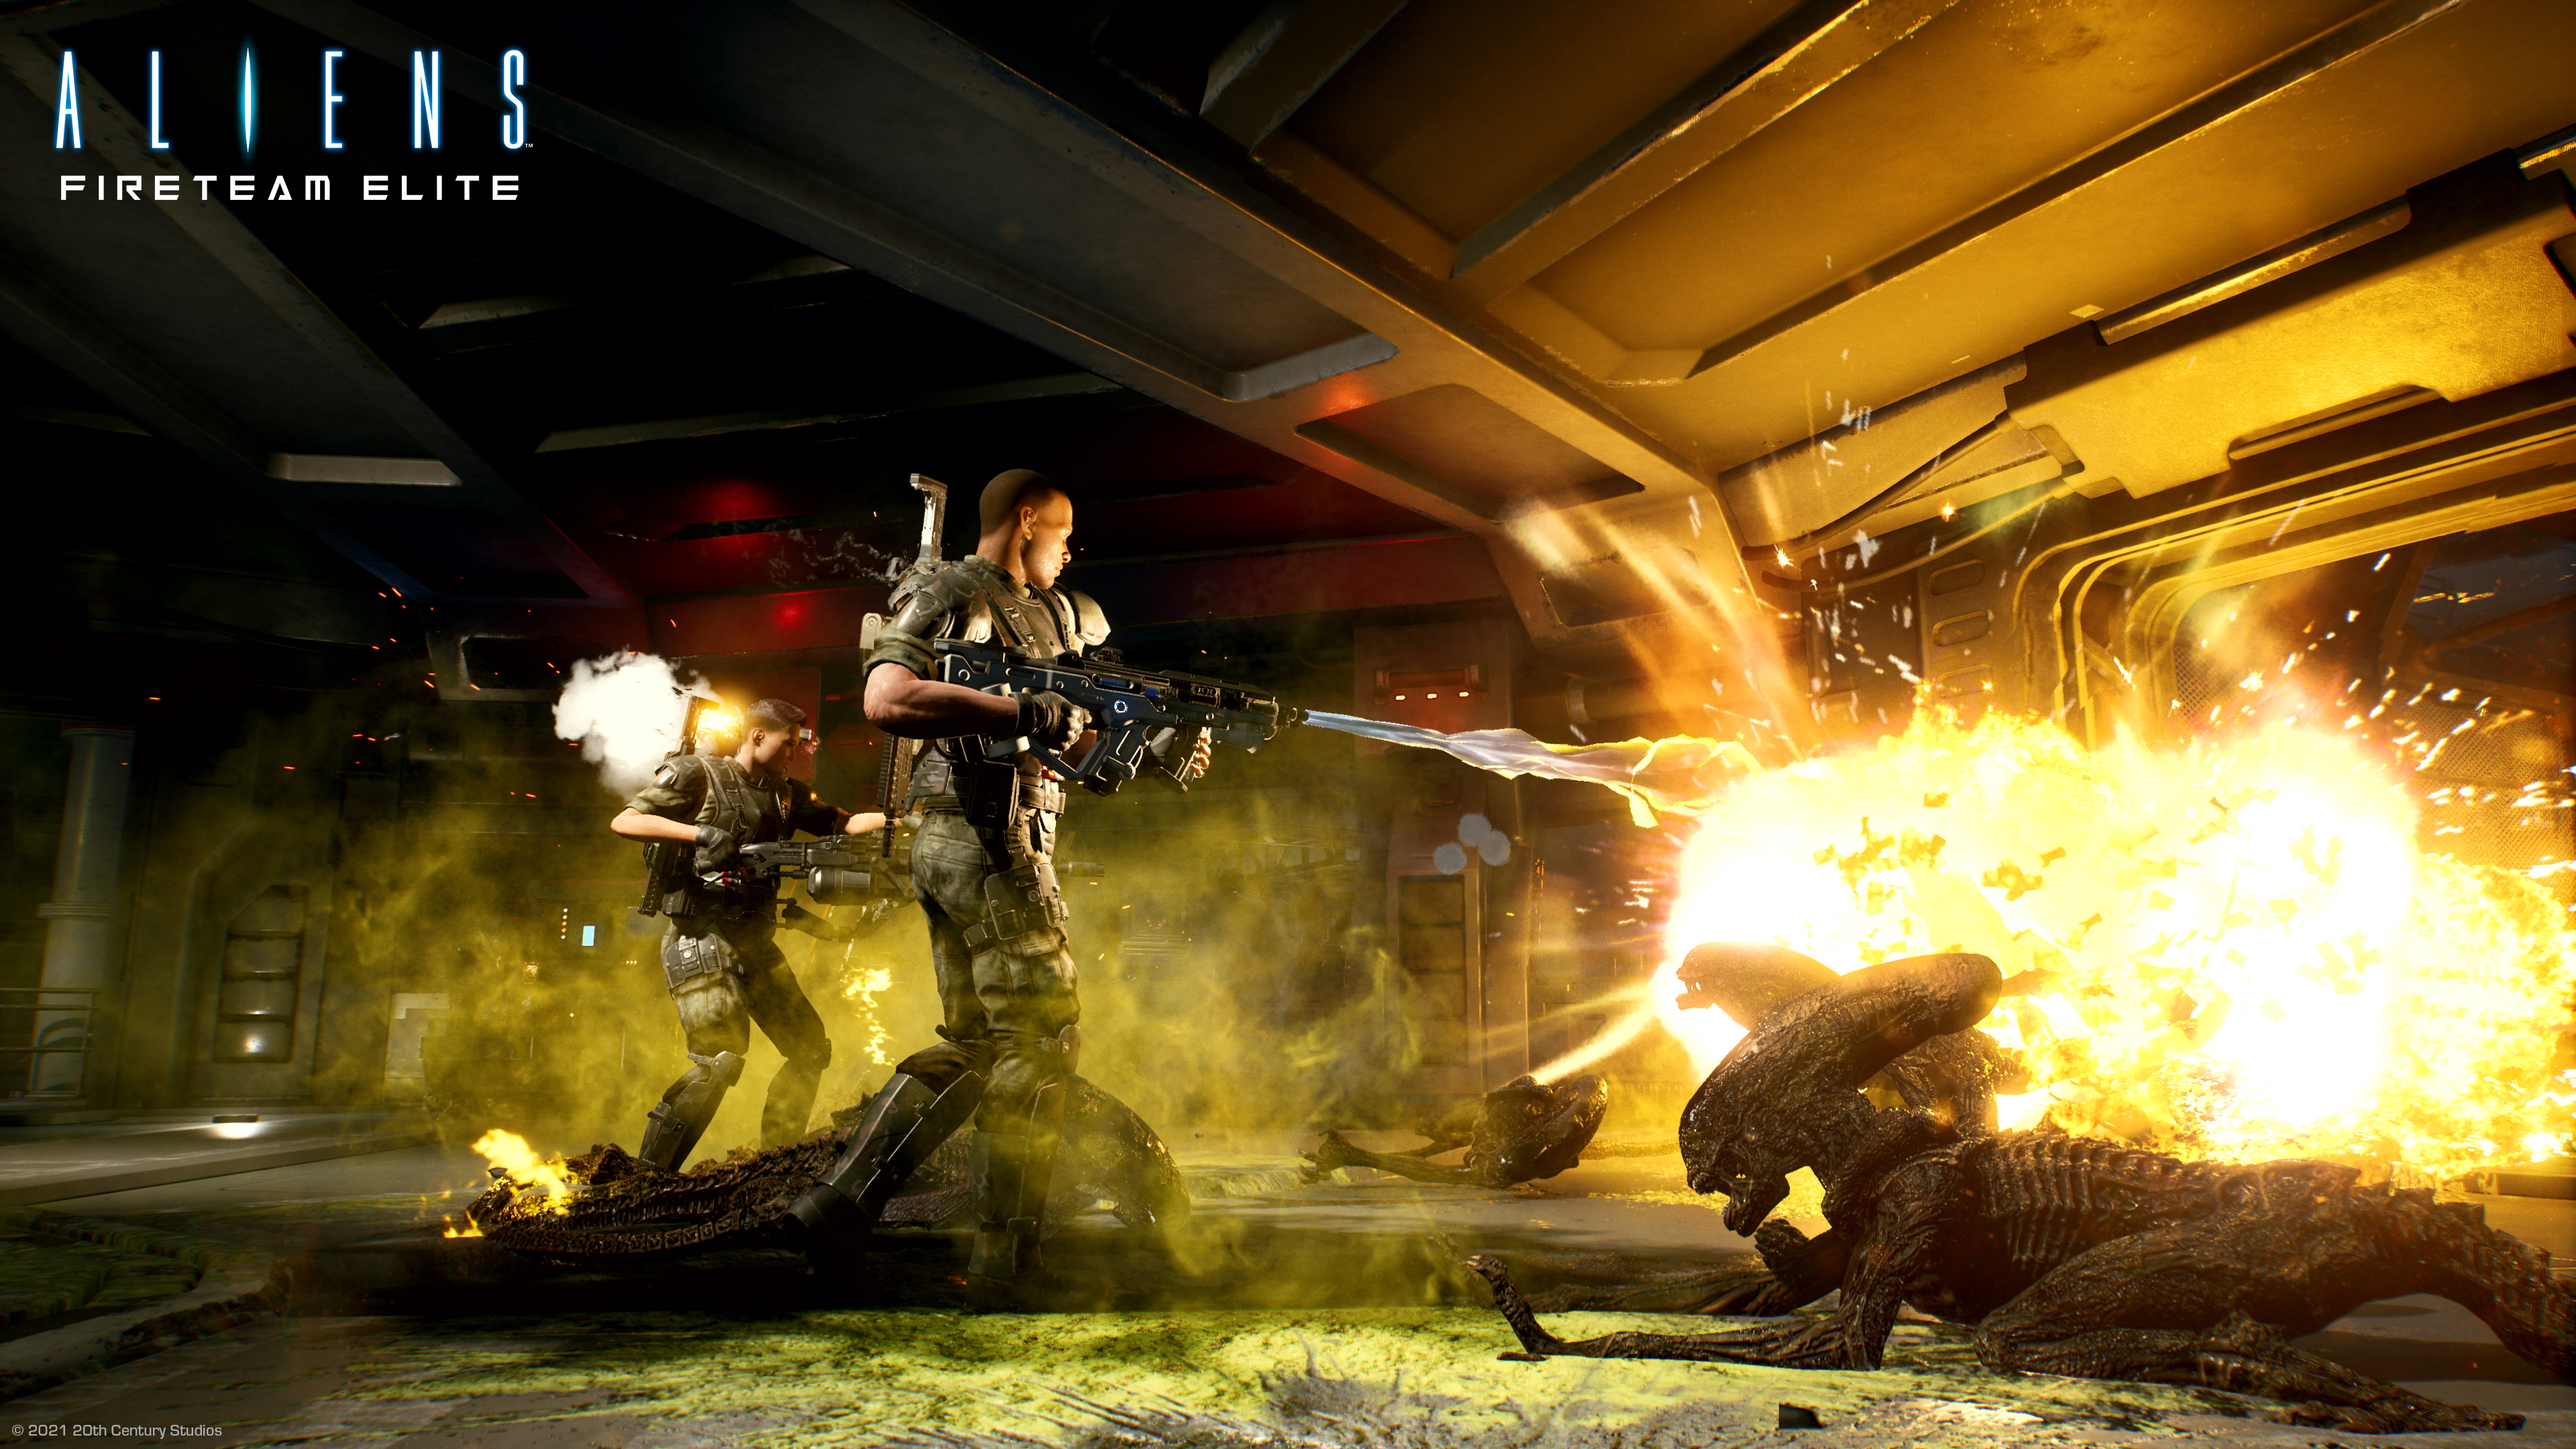 HD wallpaper of Aliens: Fireteam Elite featuring soldiers in combat with alien creatures, showcasing explosive action and detailed graphics suitable for desktop backgrounds.